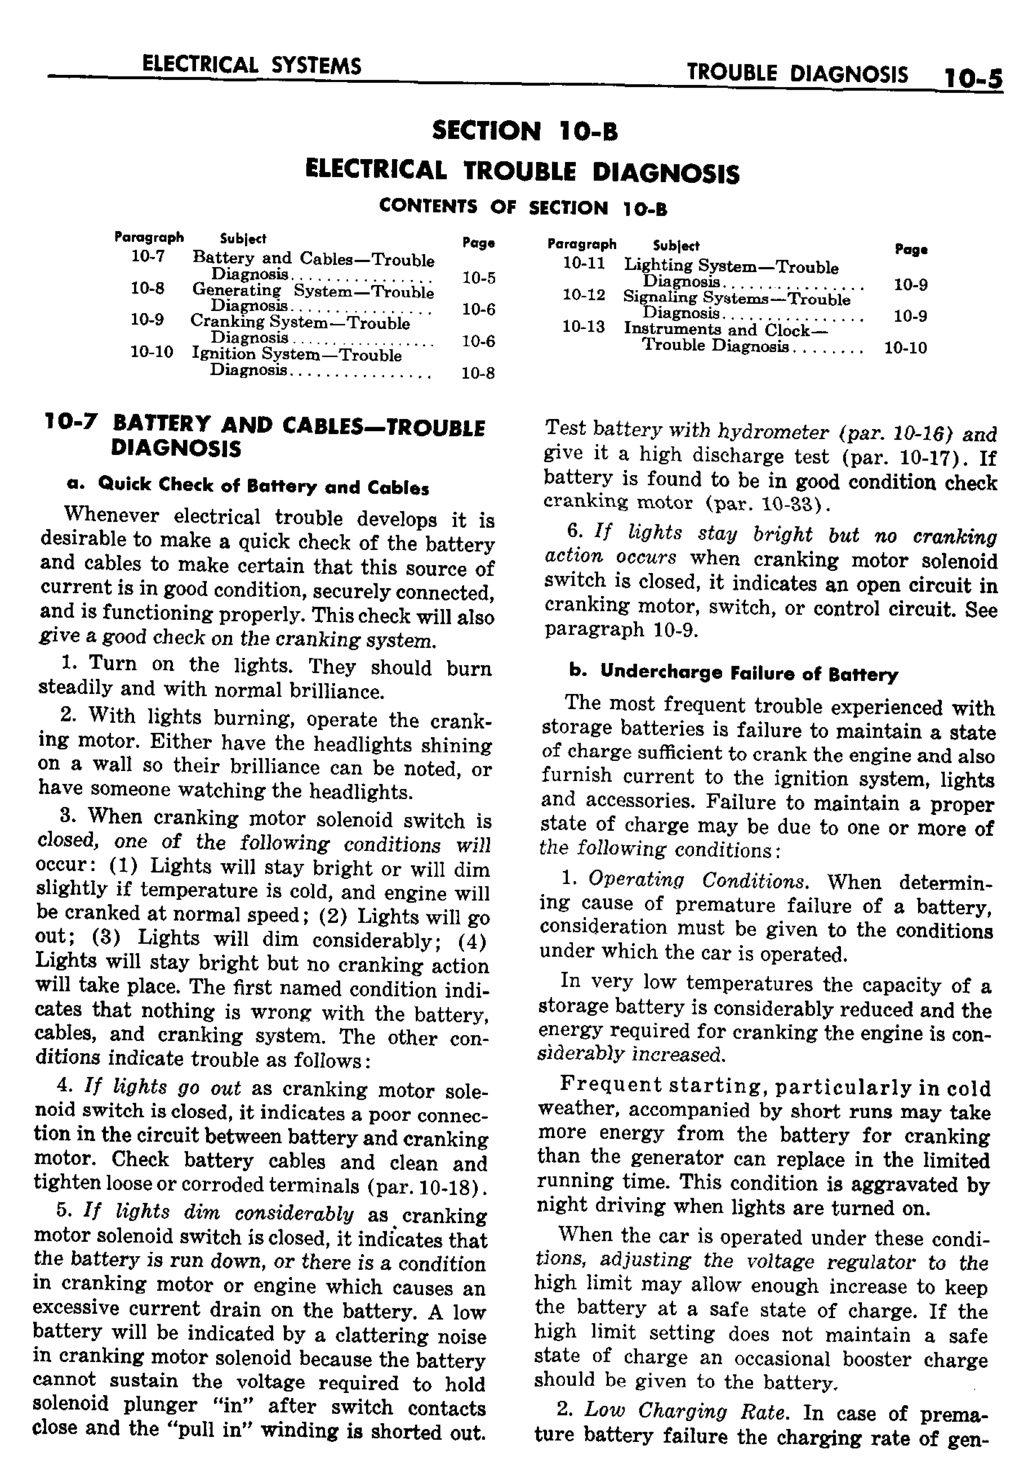 n_11 1959 Buick Shop Manual - Electrical Systems-005-005.jpg